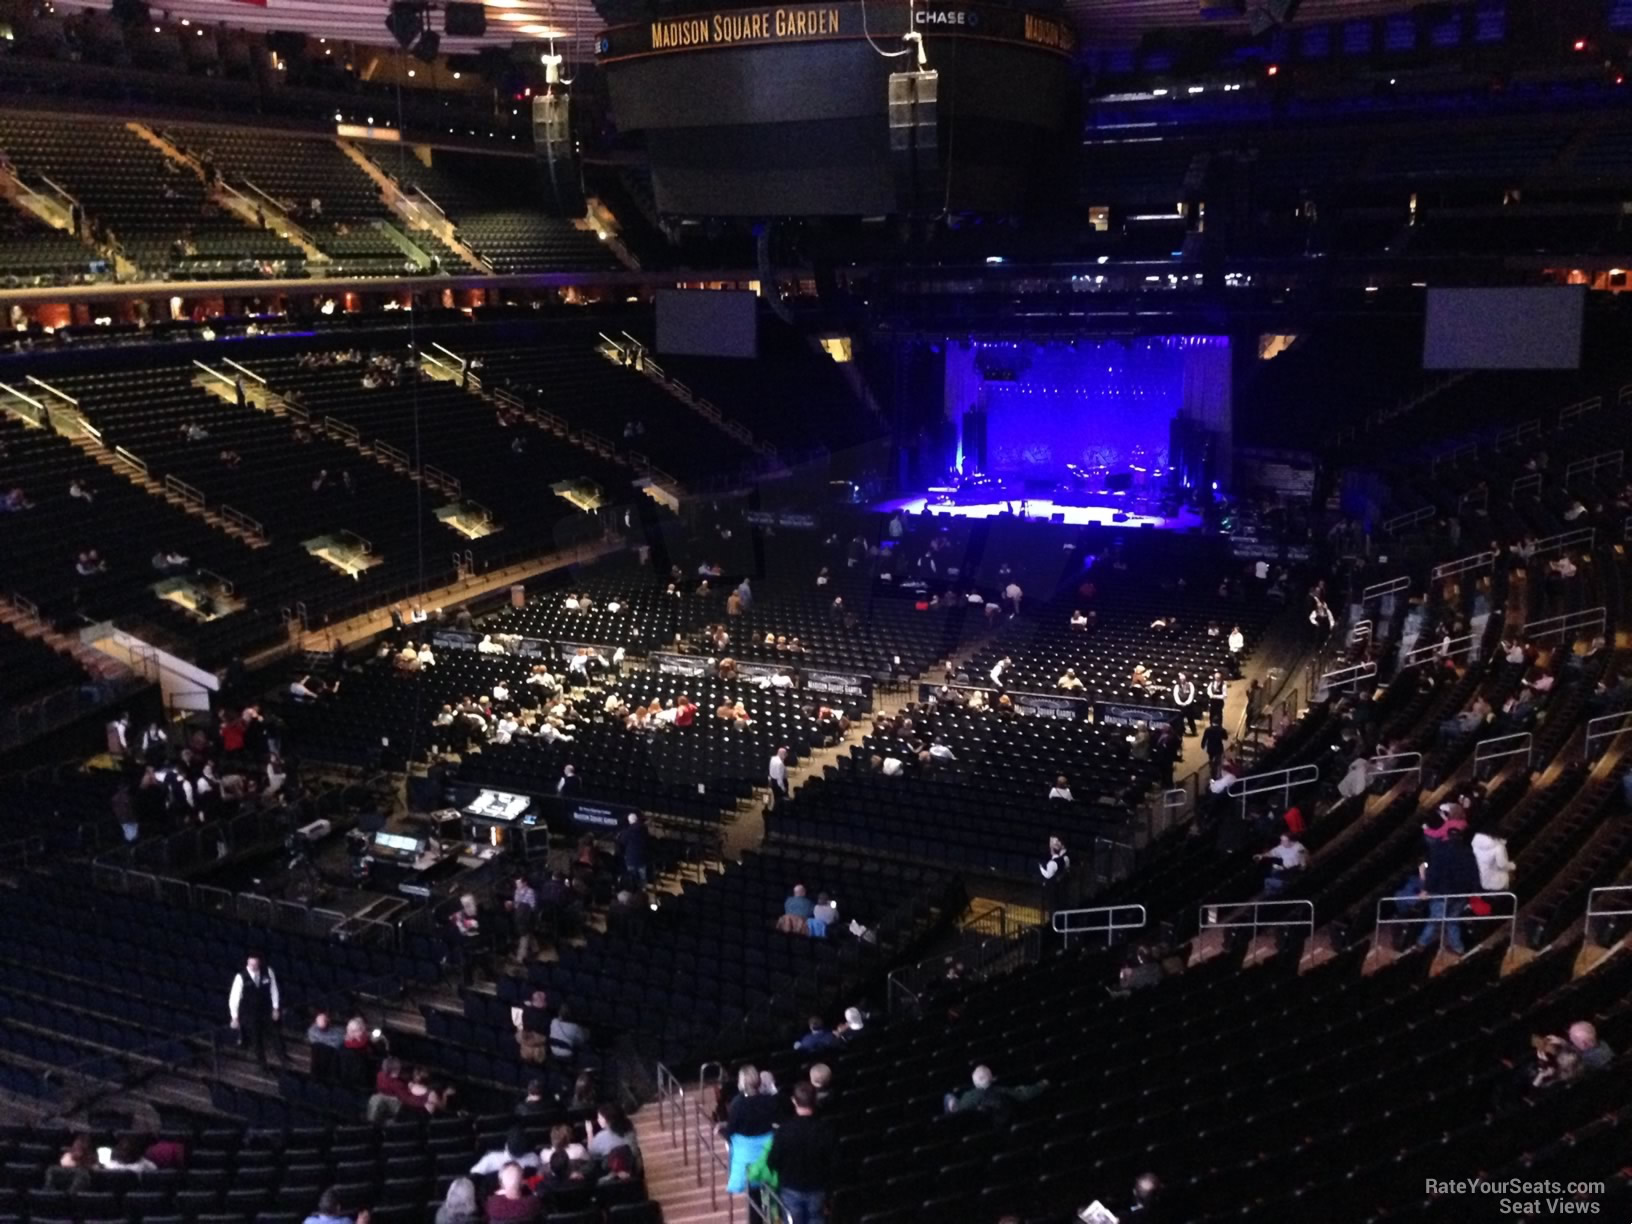 section 206, row 2 seat view  for concert - madison square garden